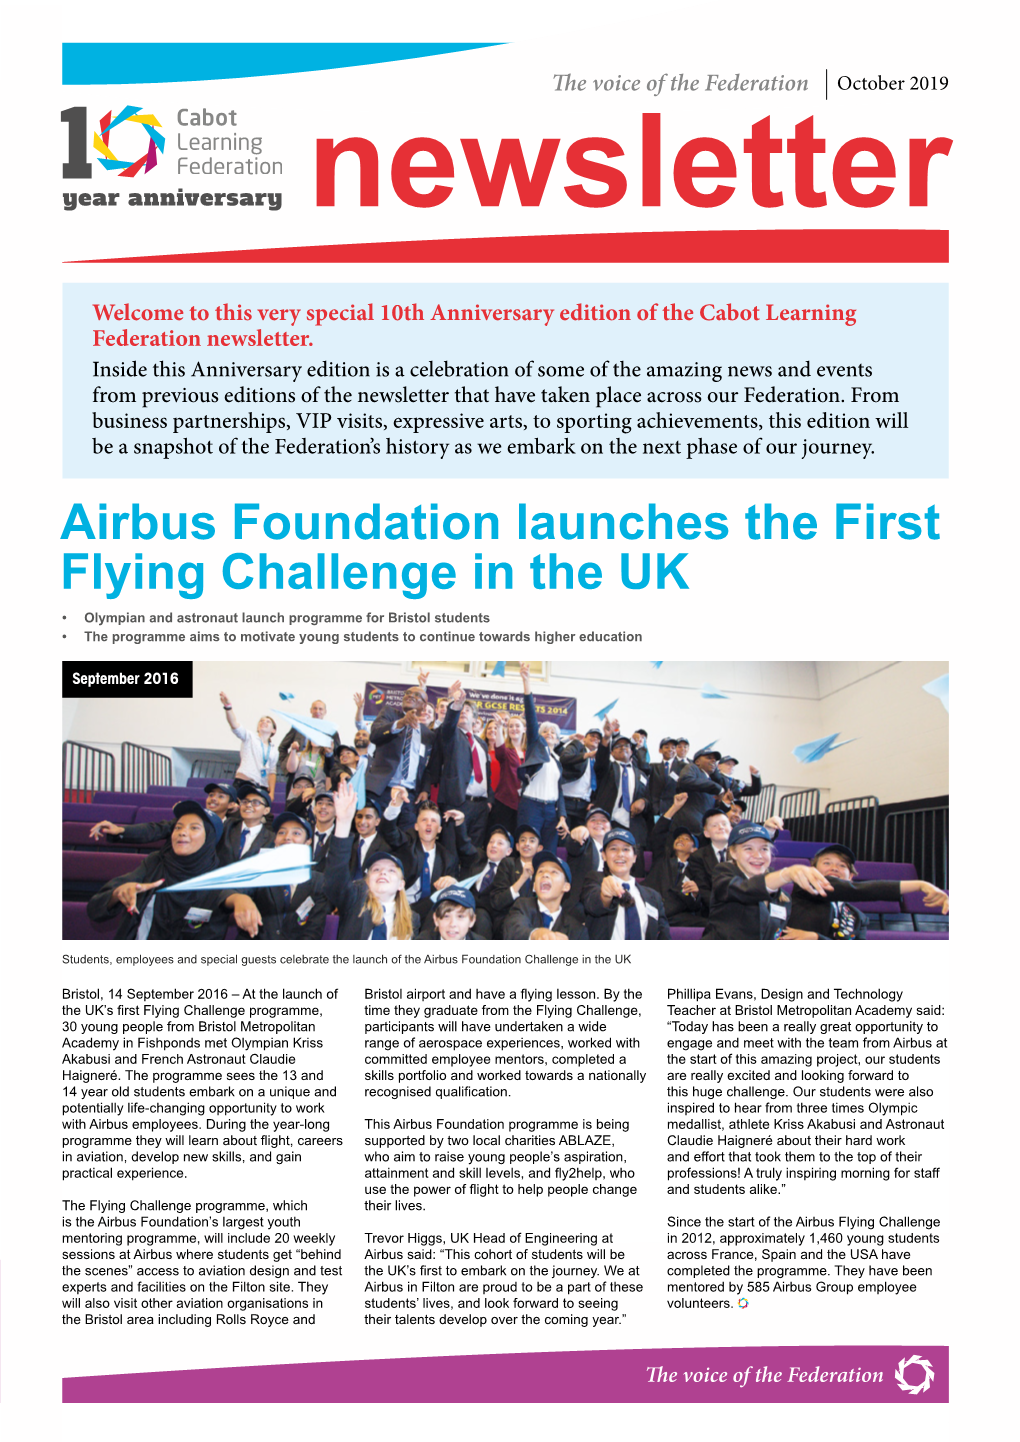 Airbus Foundation Launches the First Flying Challenge in the UK